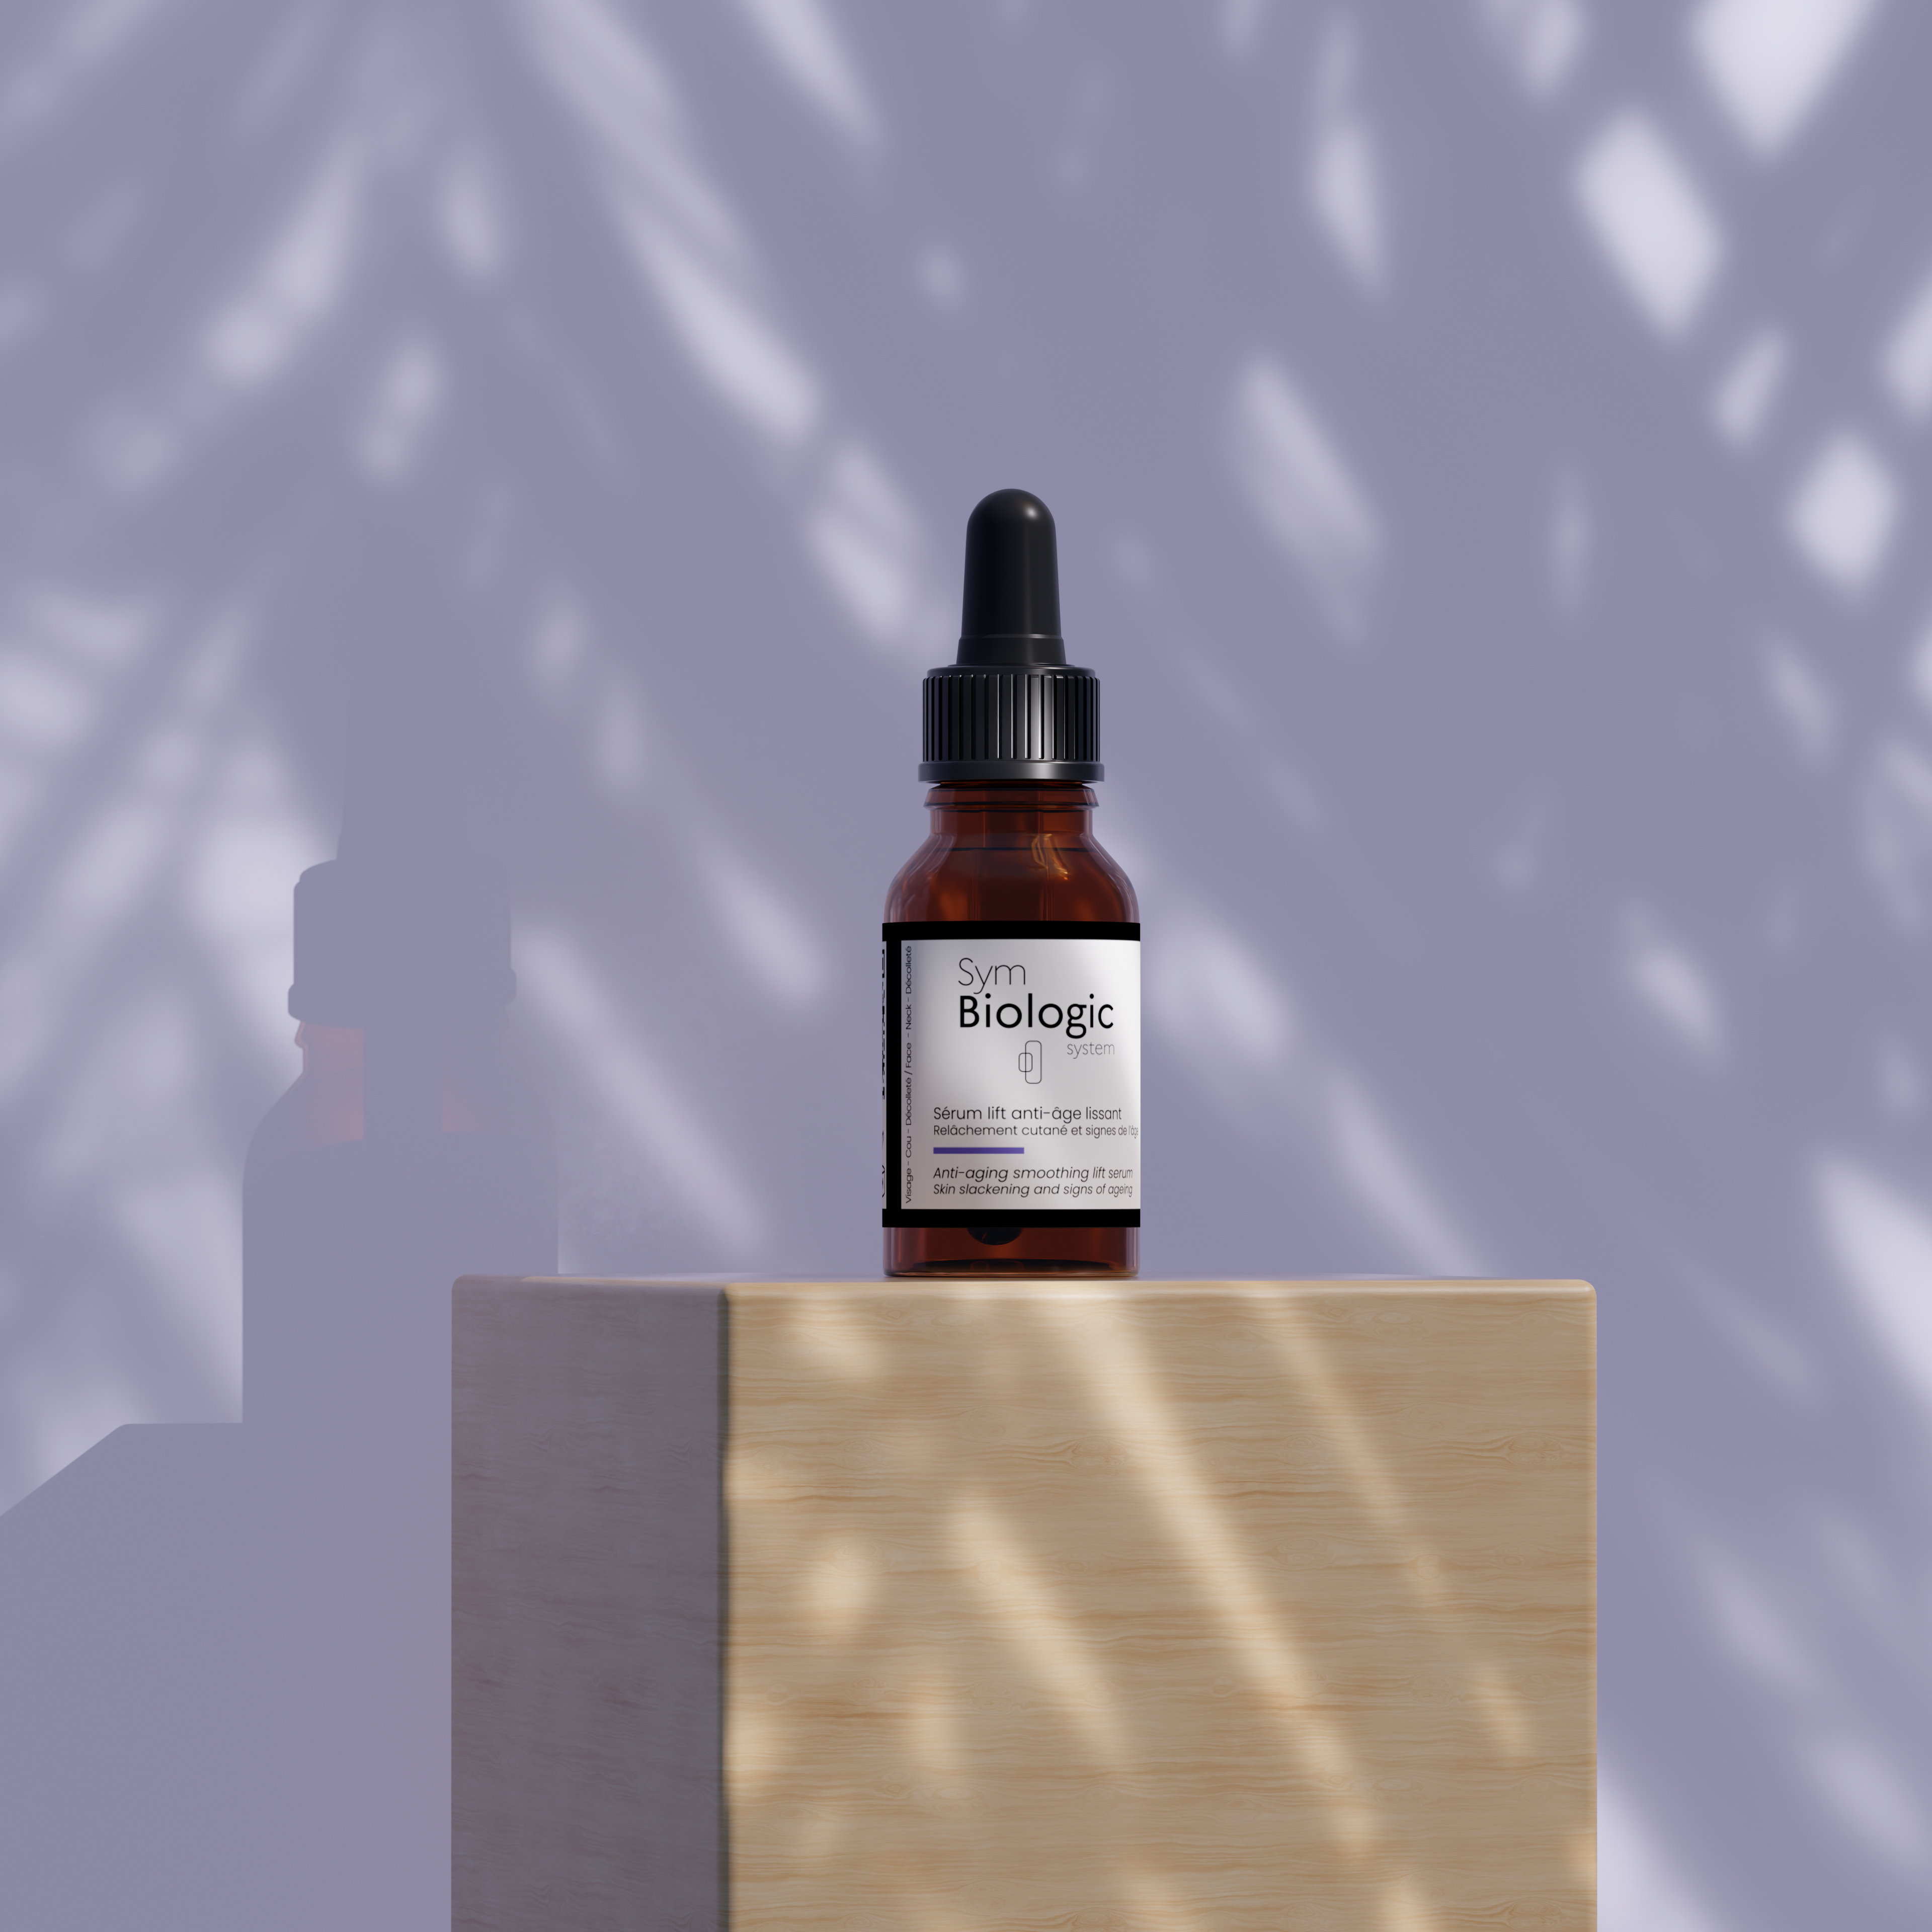 Image of anti-aging facial serum on a wooden display stand